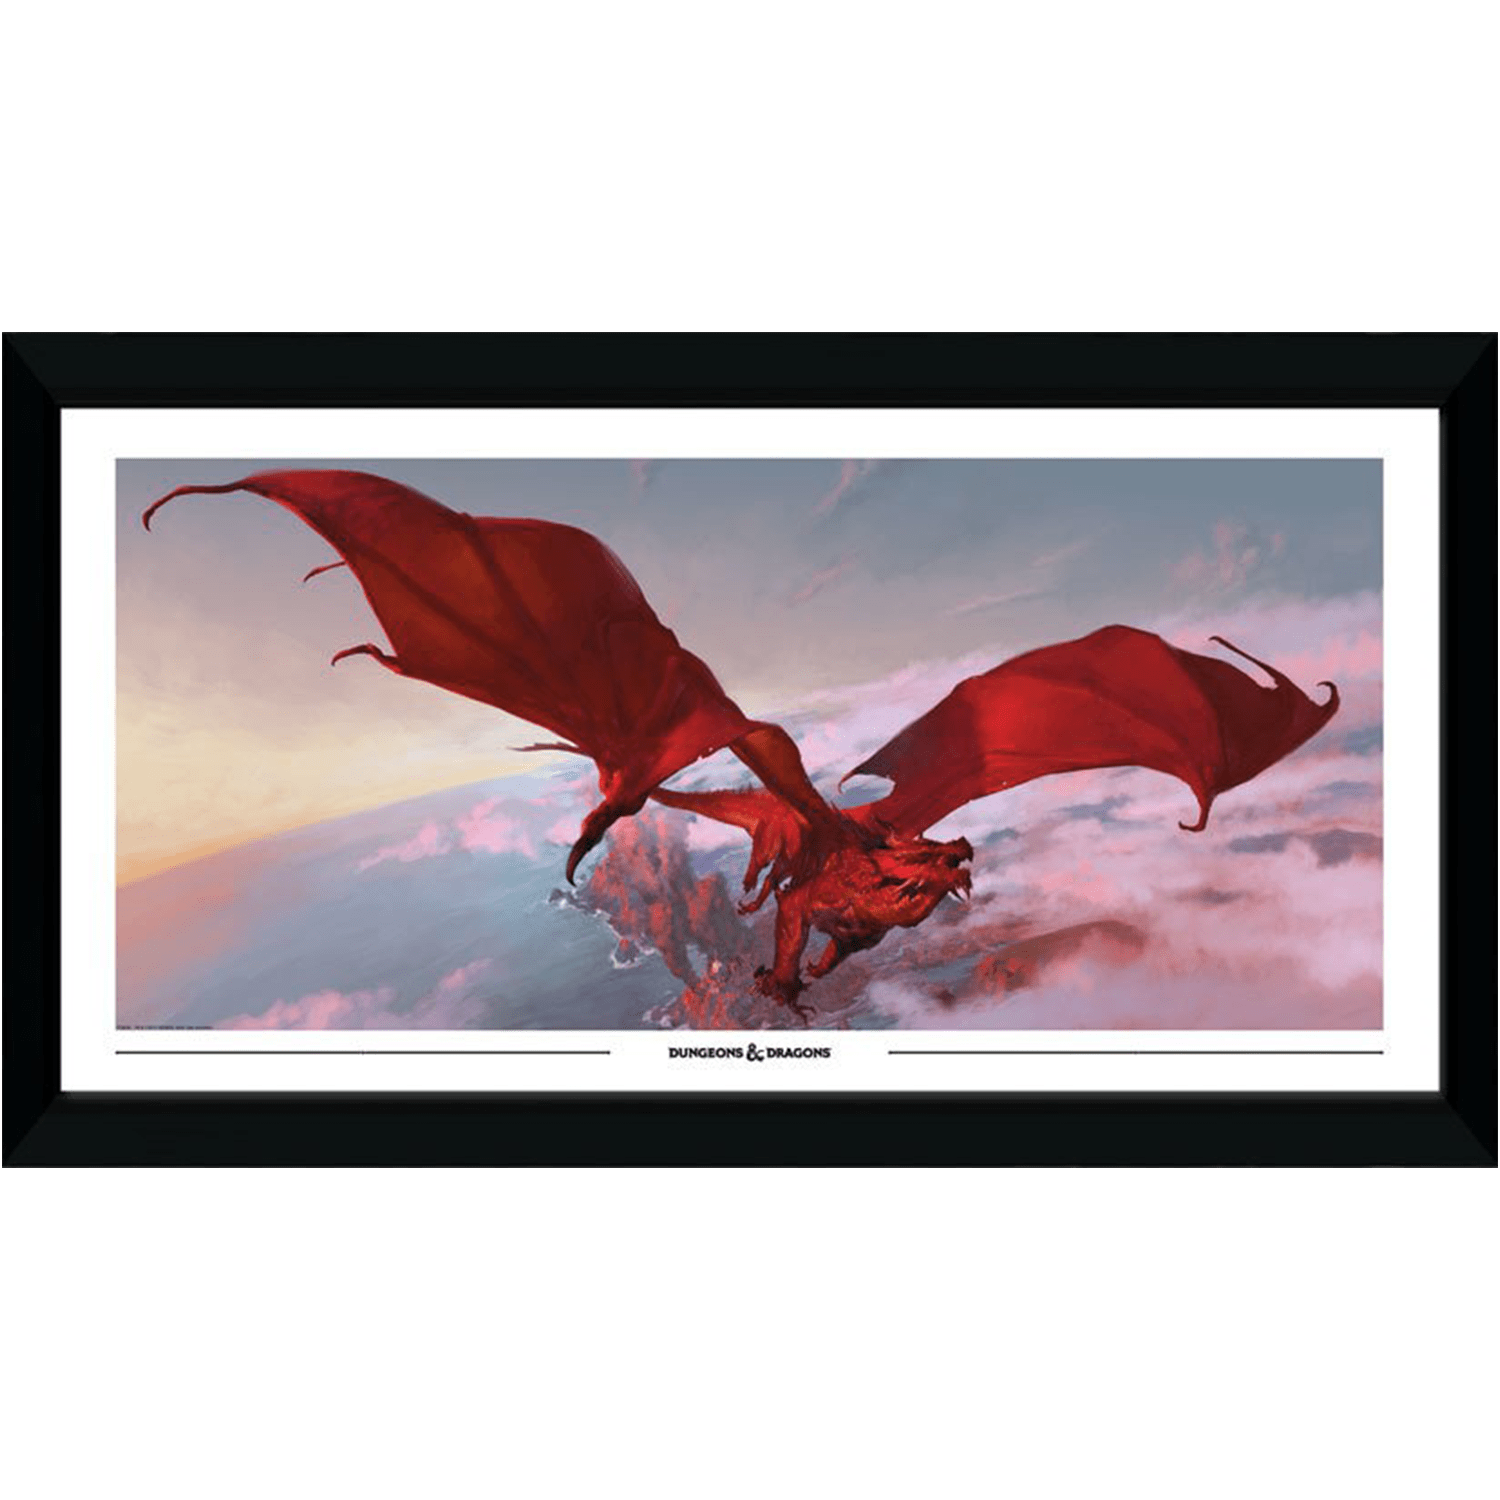 dungeons-and-dragons-red-dragon-art-print